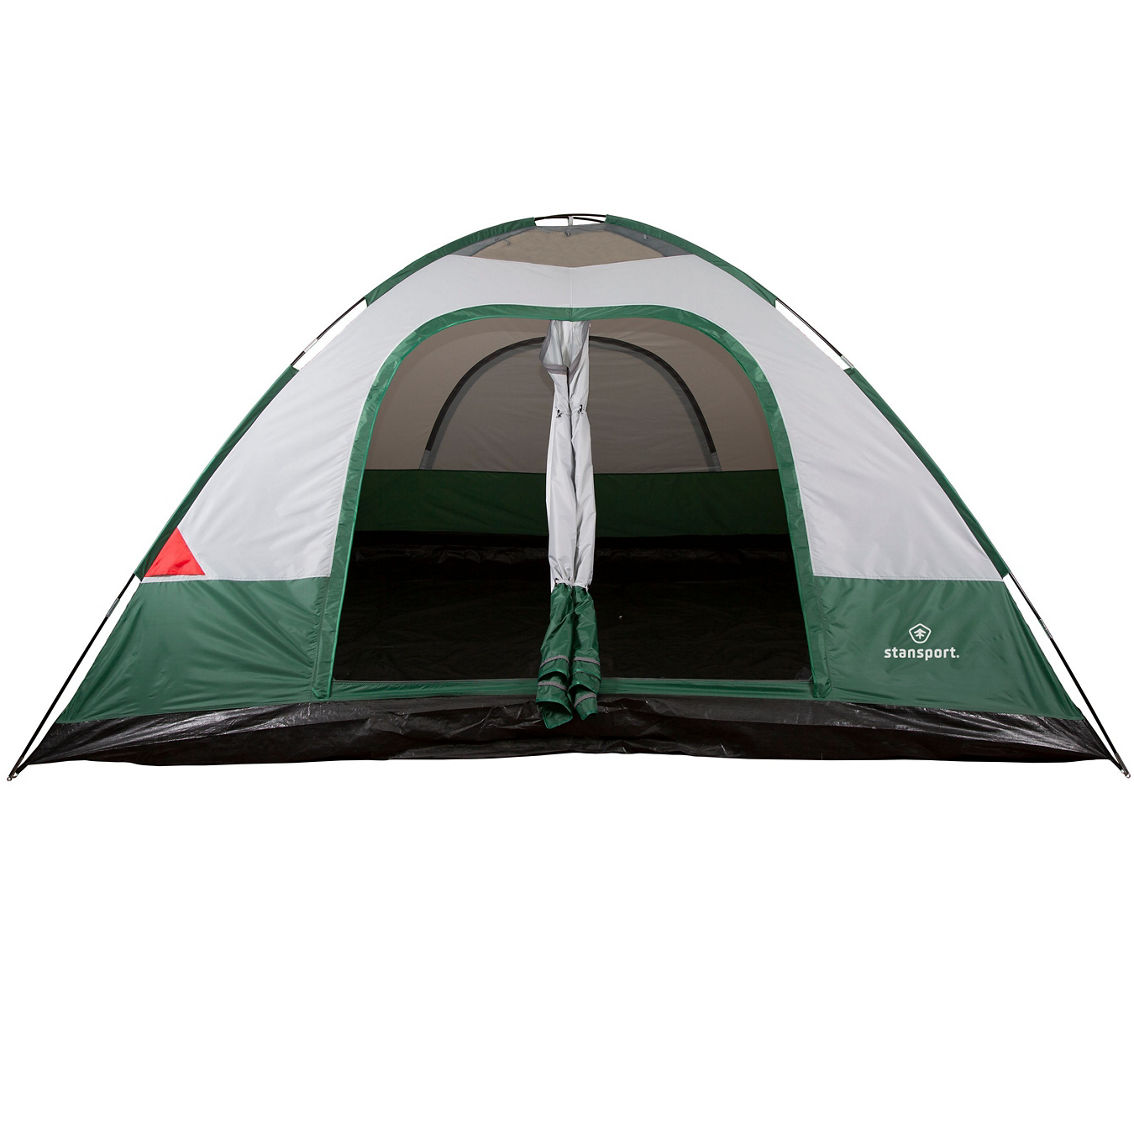 Stansport Teton 12 - 2 Room Family Tent - Image 2 of 5